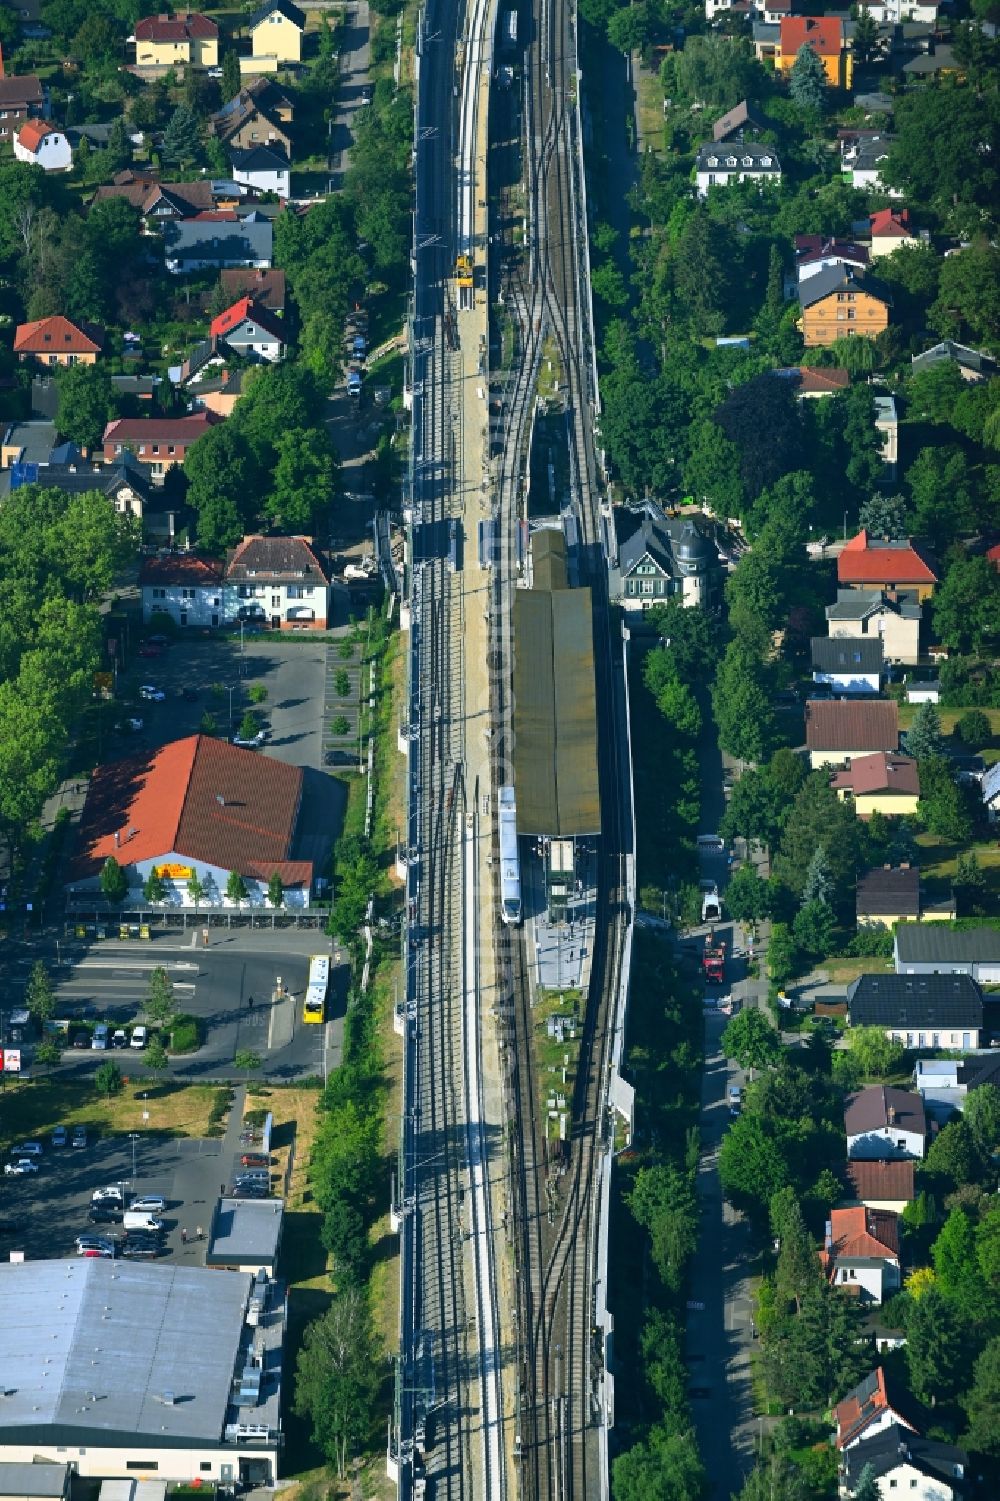 Aerial image Berlin - Station building and track systems of the S-Bahn station Karow in the district Karow in Berlin, Germany